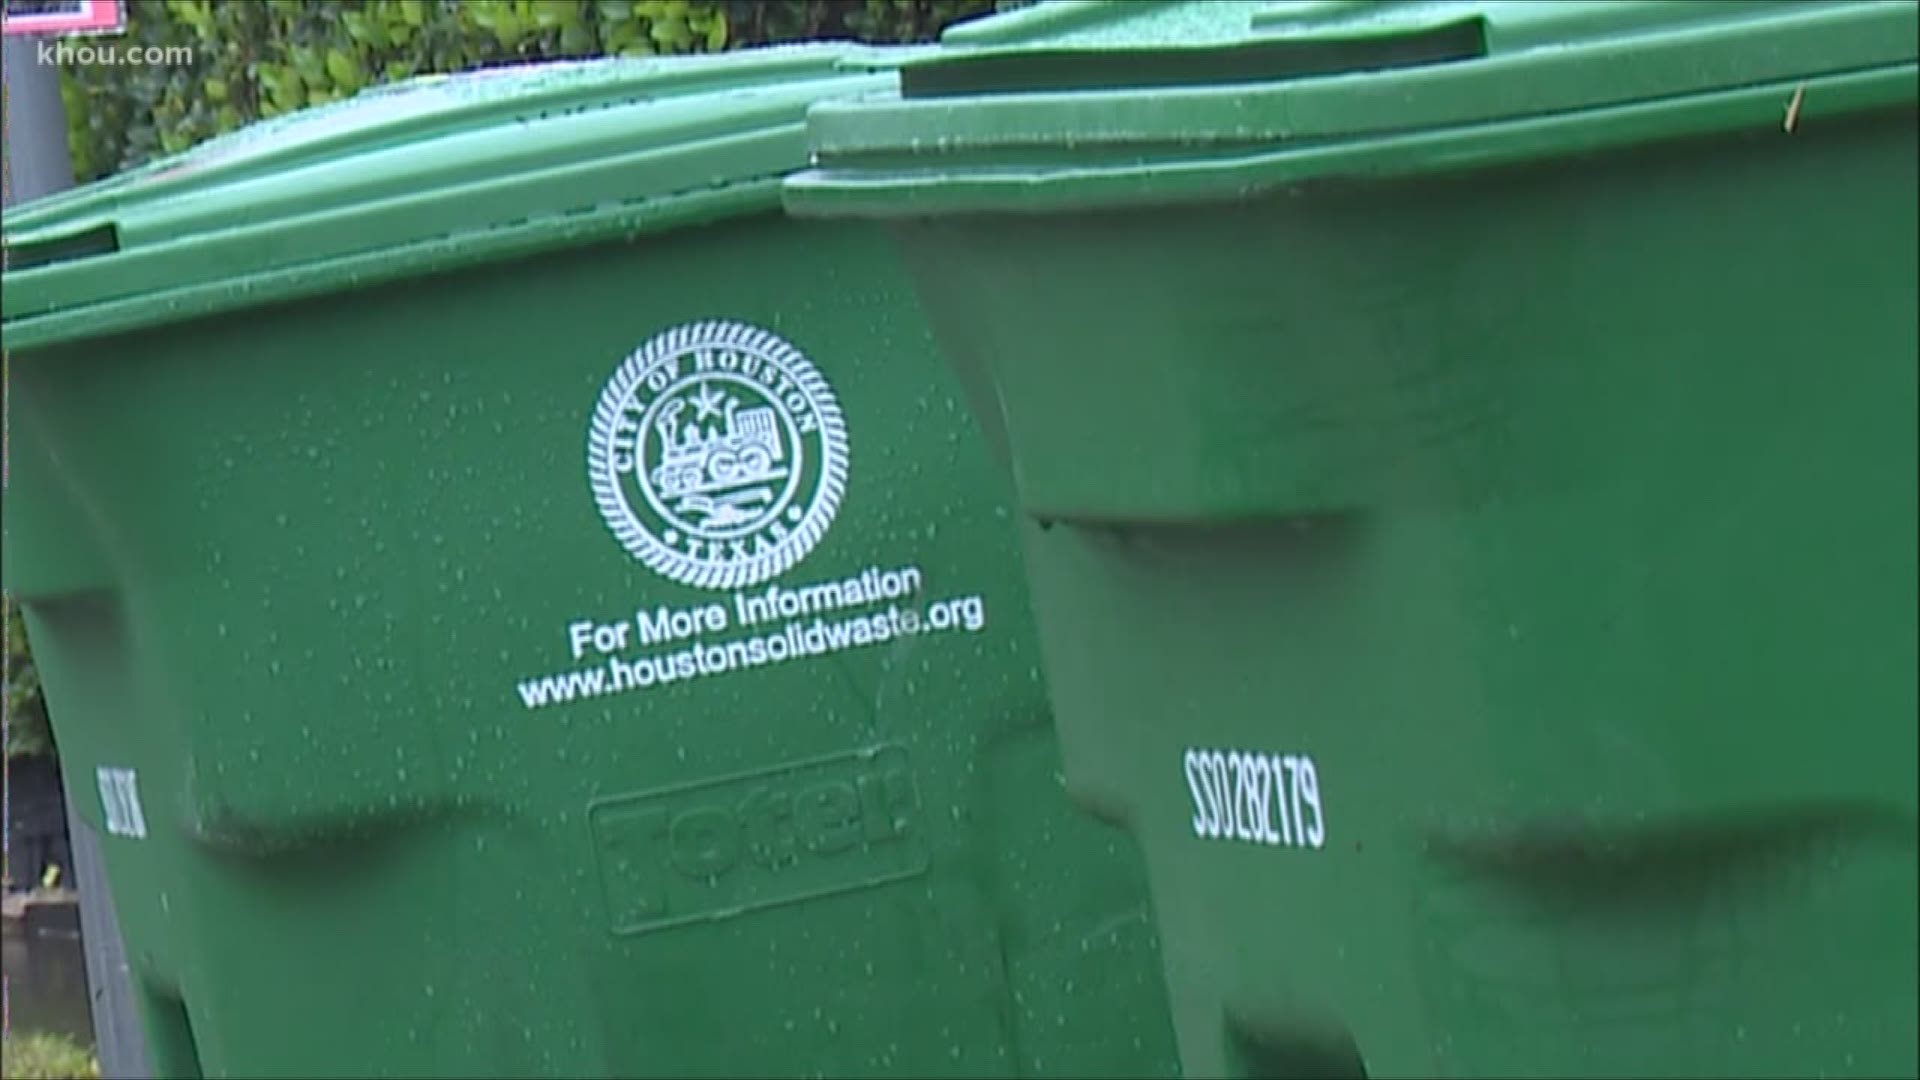 Some Houston residents have made numerous 311 calls and claim recycling bins are left untouched for days.